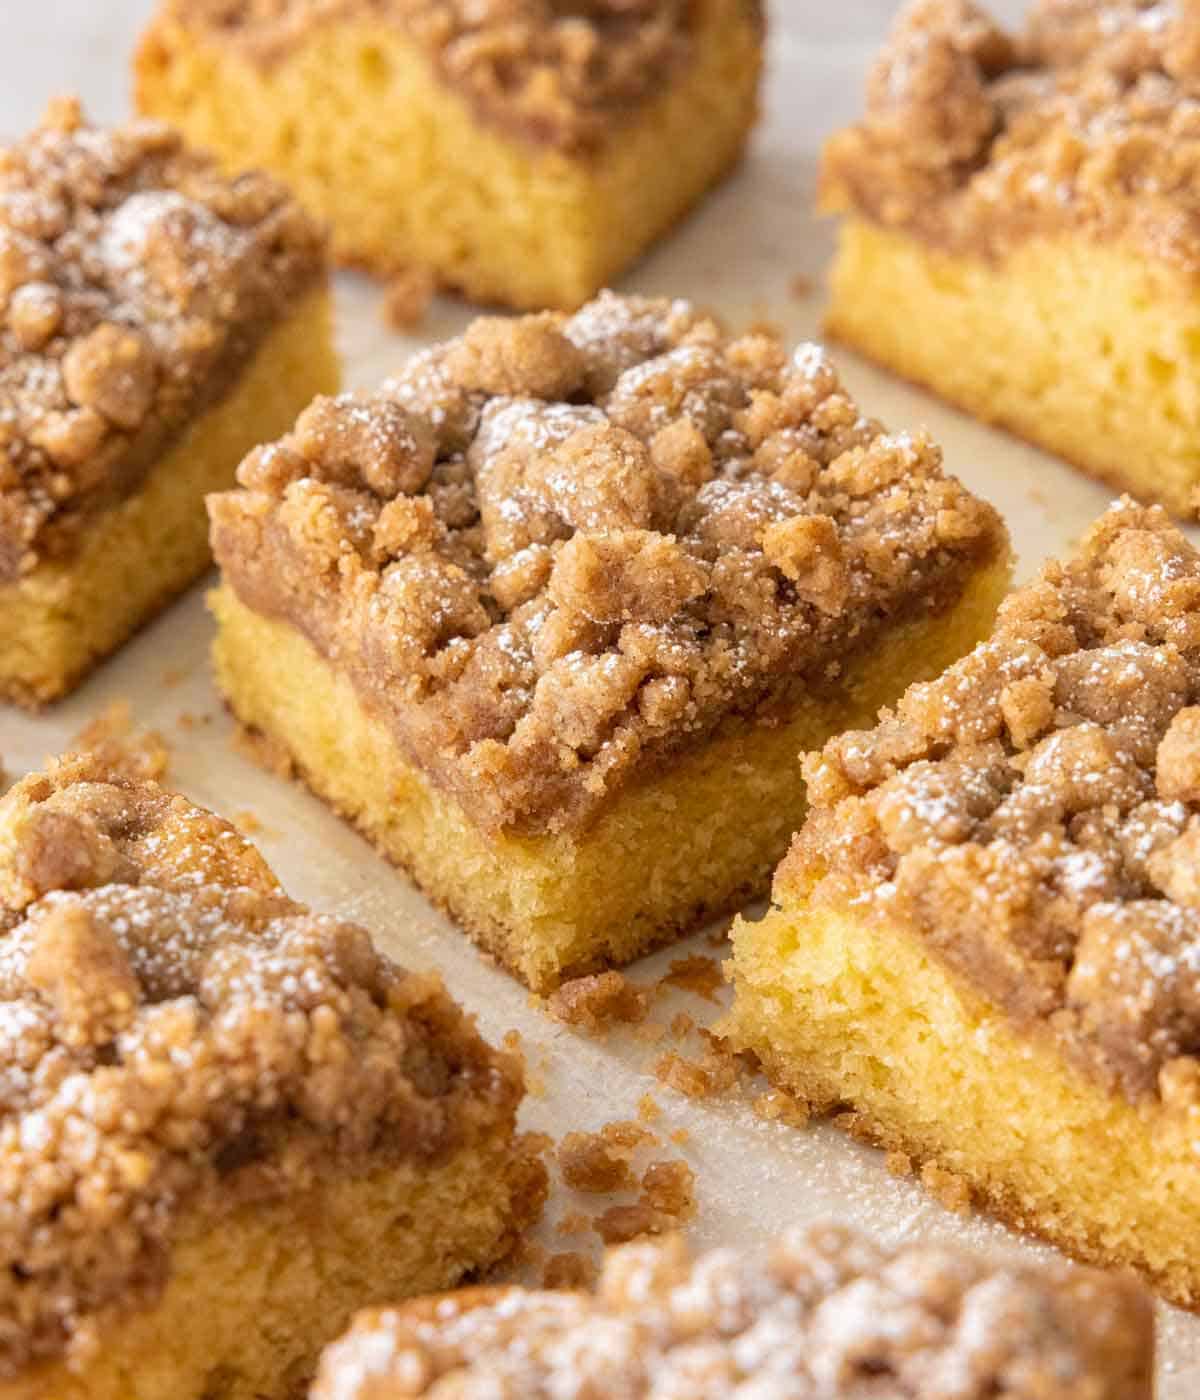 Square slices of crumb cake scattered on a counter.